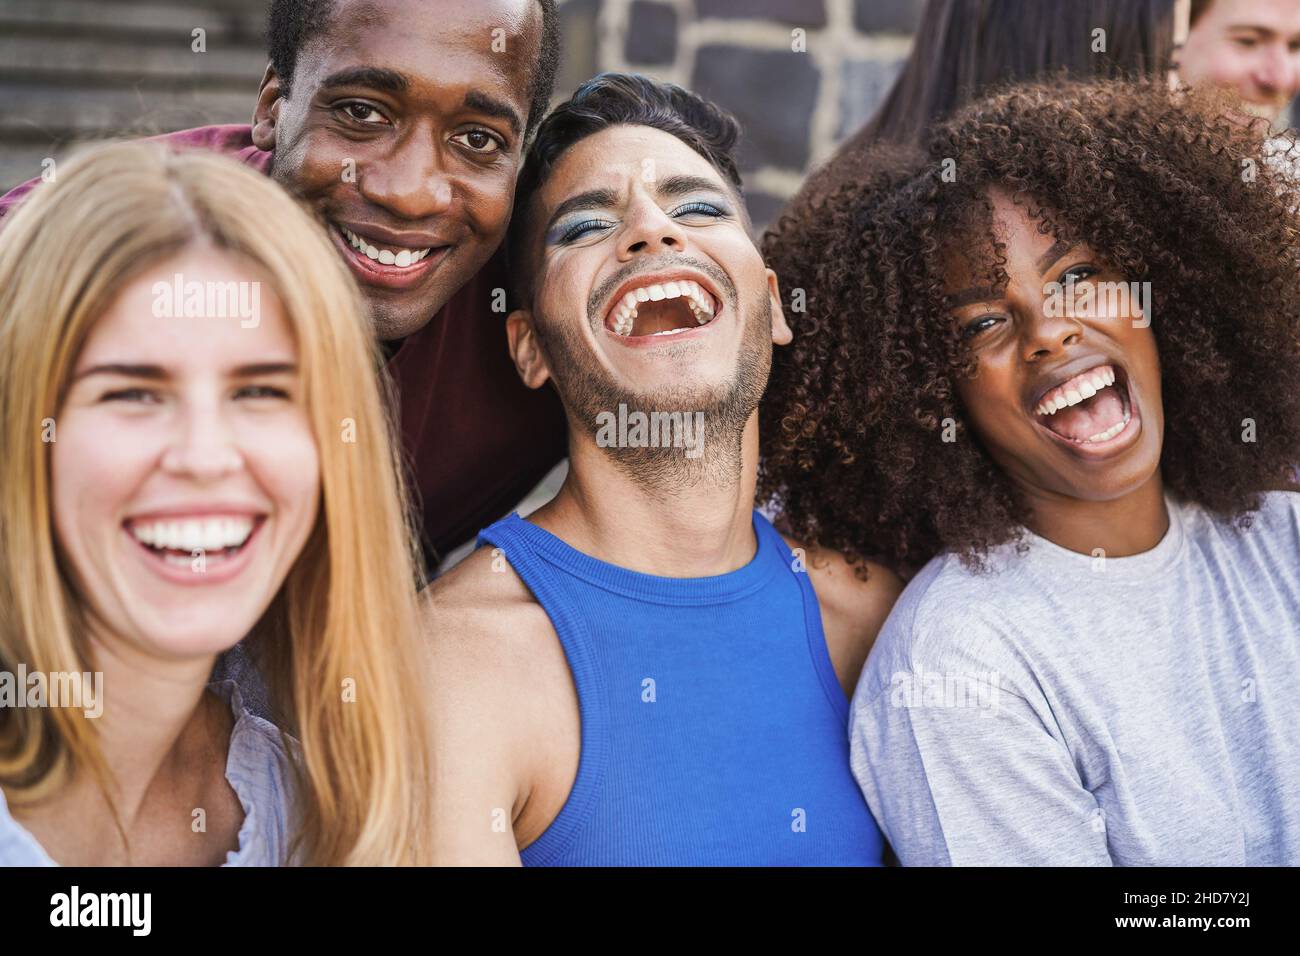 Young diverse people having fun outdoor laughing together - Focus on gay male face Stock Photo